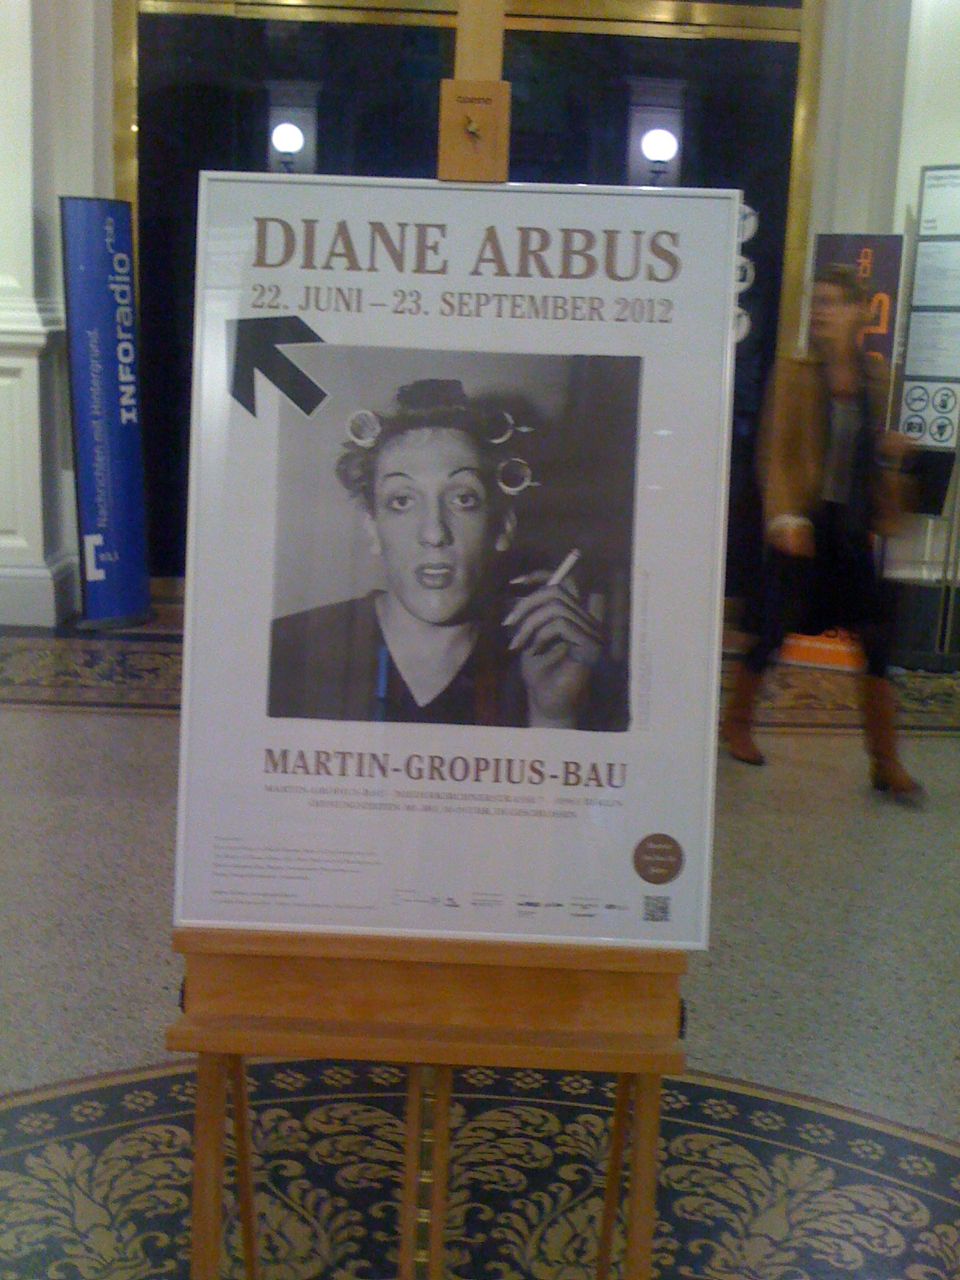 <!--:en-->Diane Arbus The Photographer and Creative Force of the 20th Century is exhibited in Berlin!!!!<!--:-->